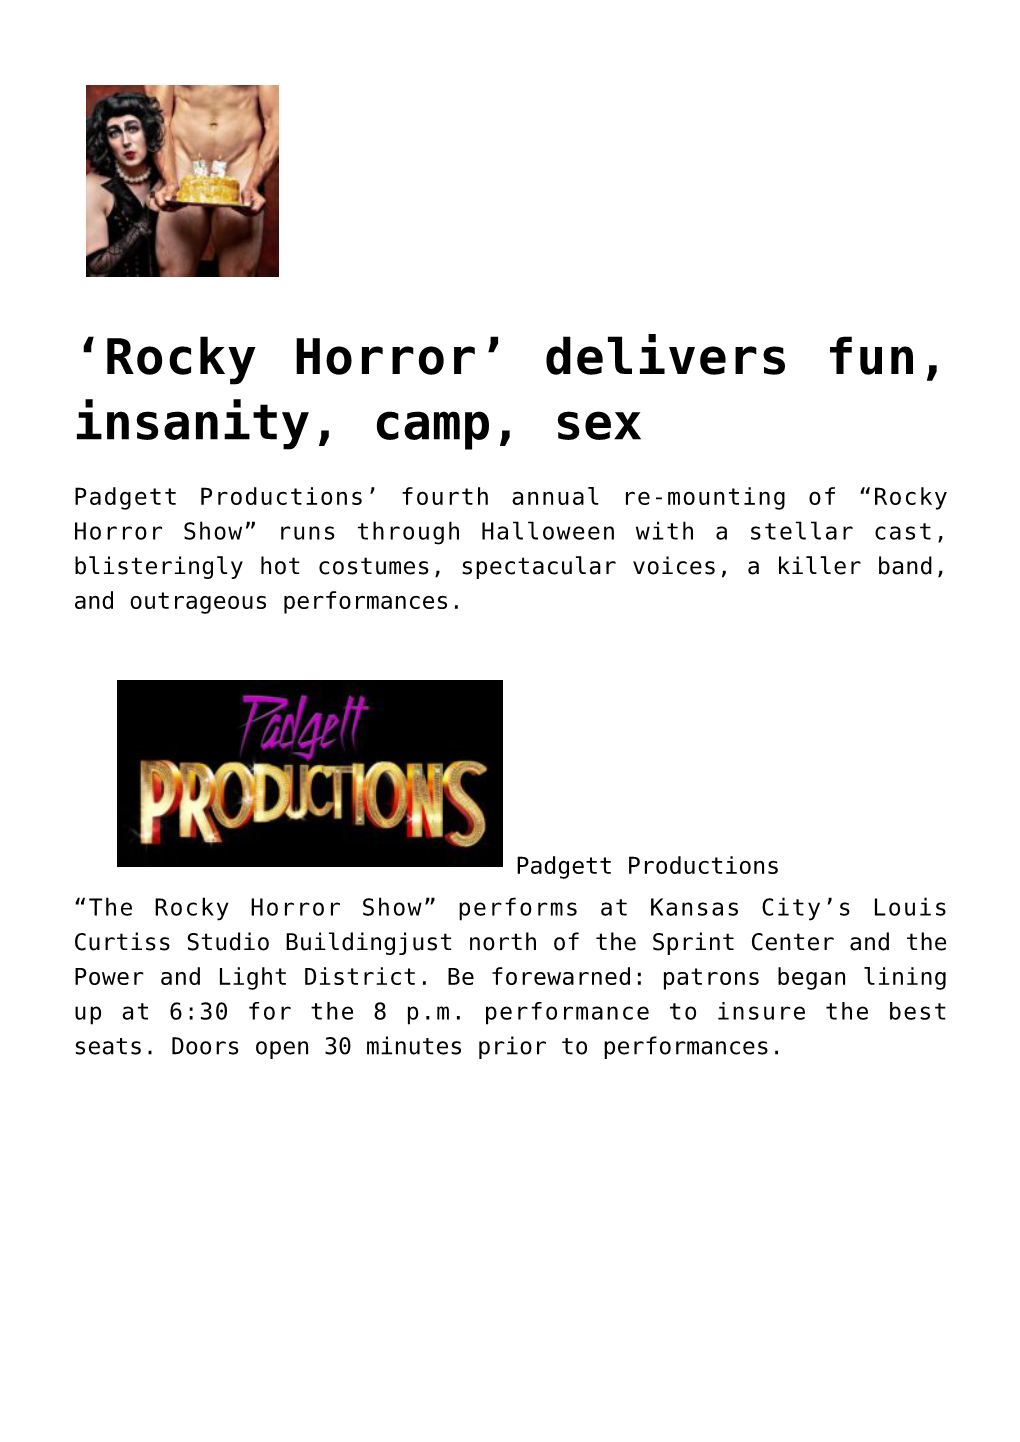 Rocky Horror’ Delivers Fun, Insanity, Camp, Sex